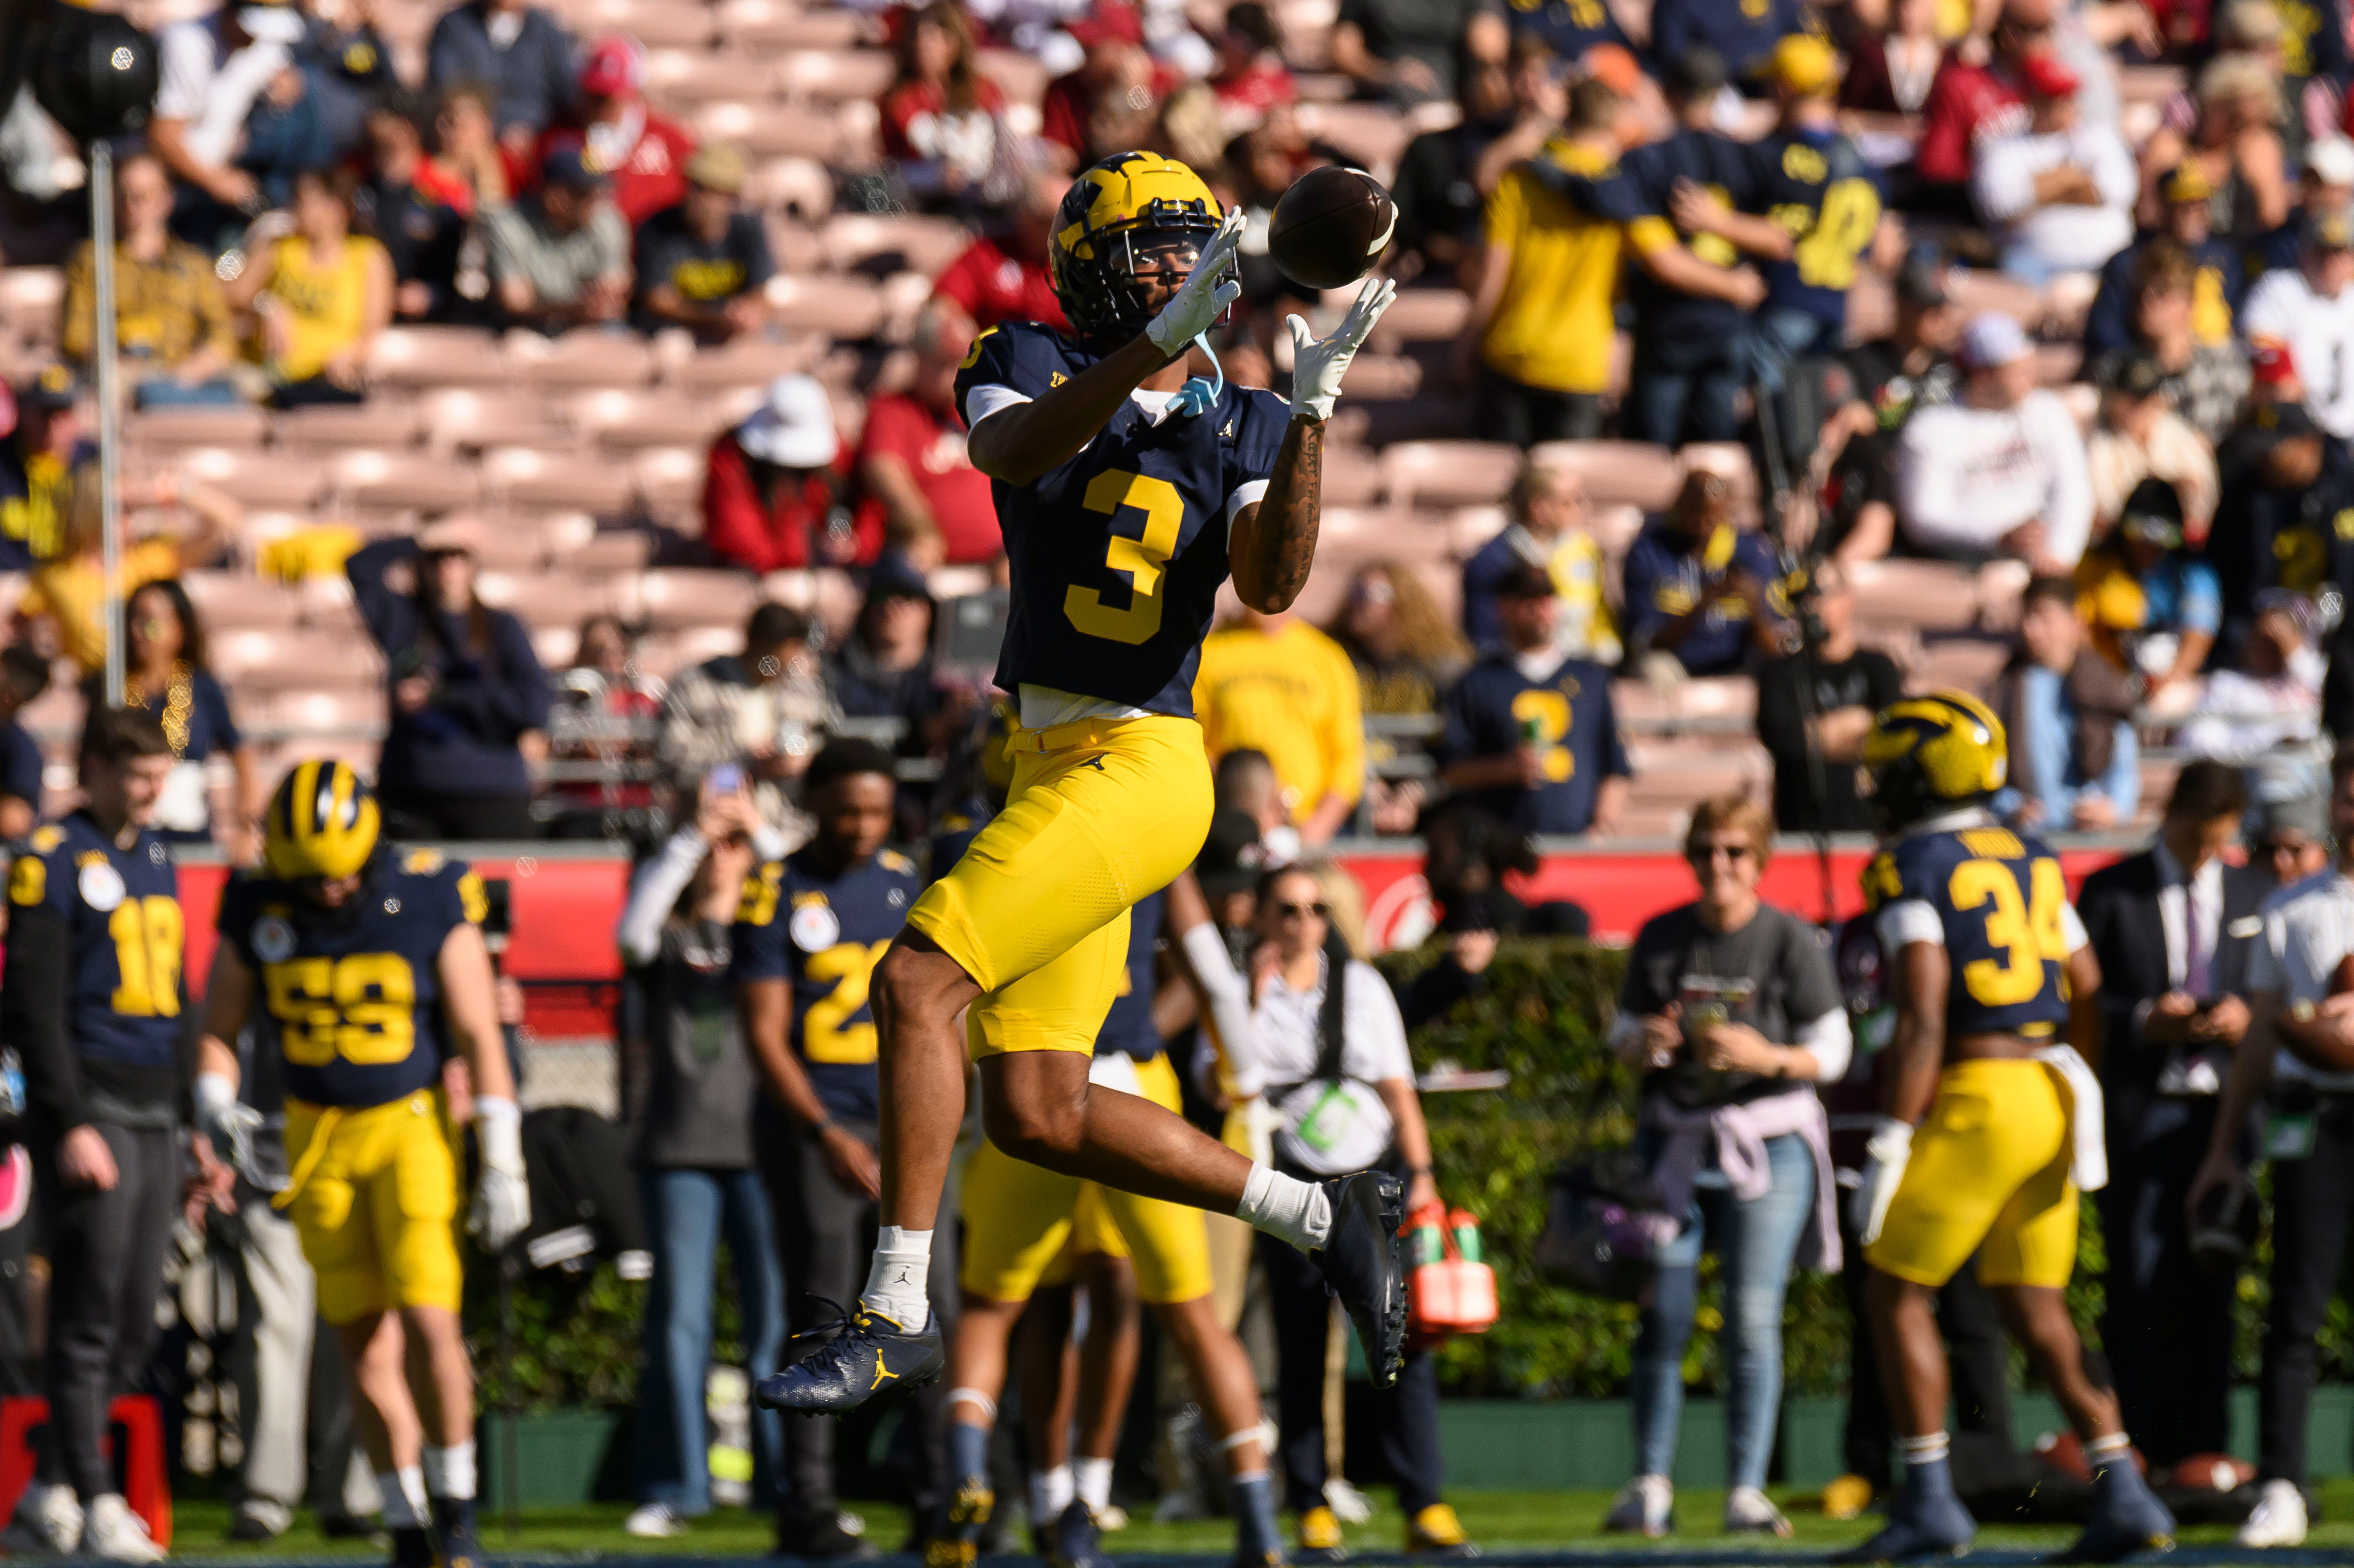 Michigan wide receiver Fredrick Moore catches a pass before the start of the Rose Bowl, in Pasadena, California, January 1, 2024.